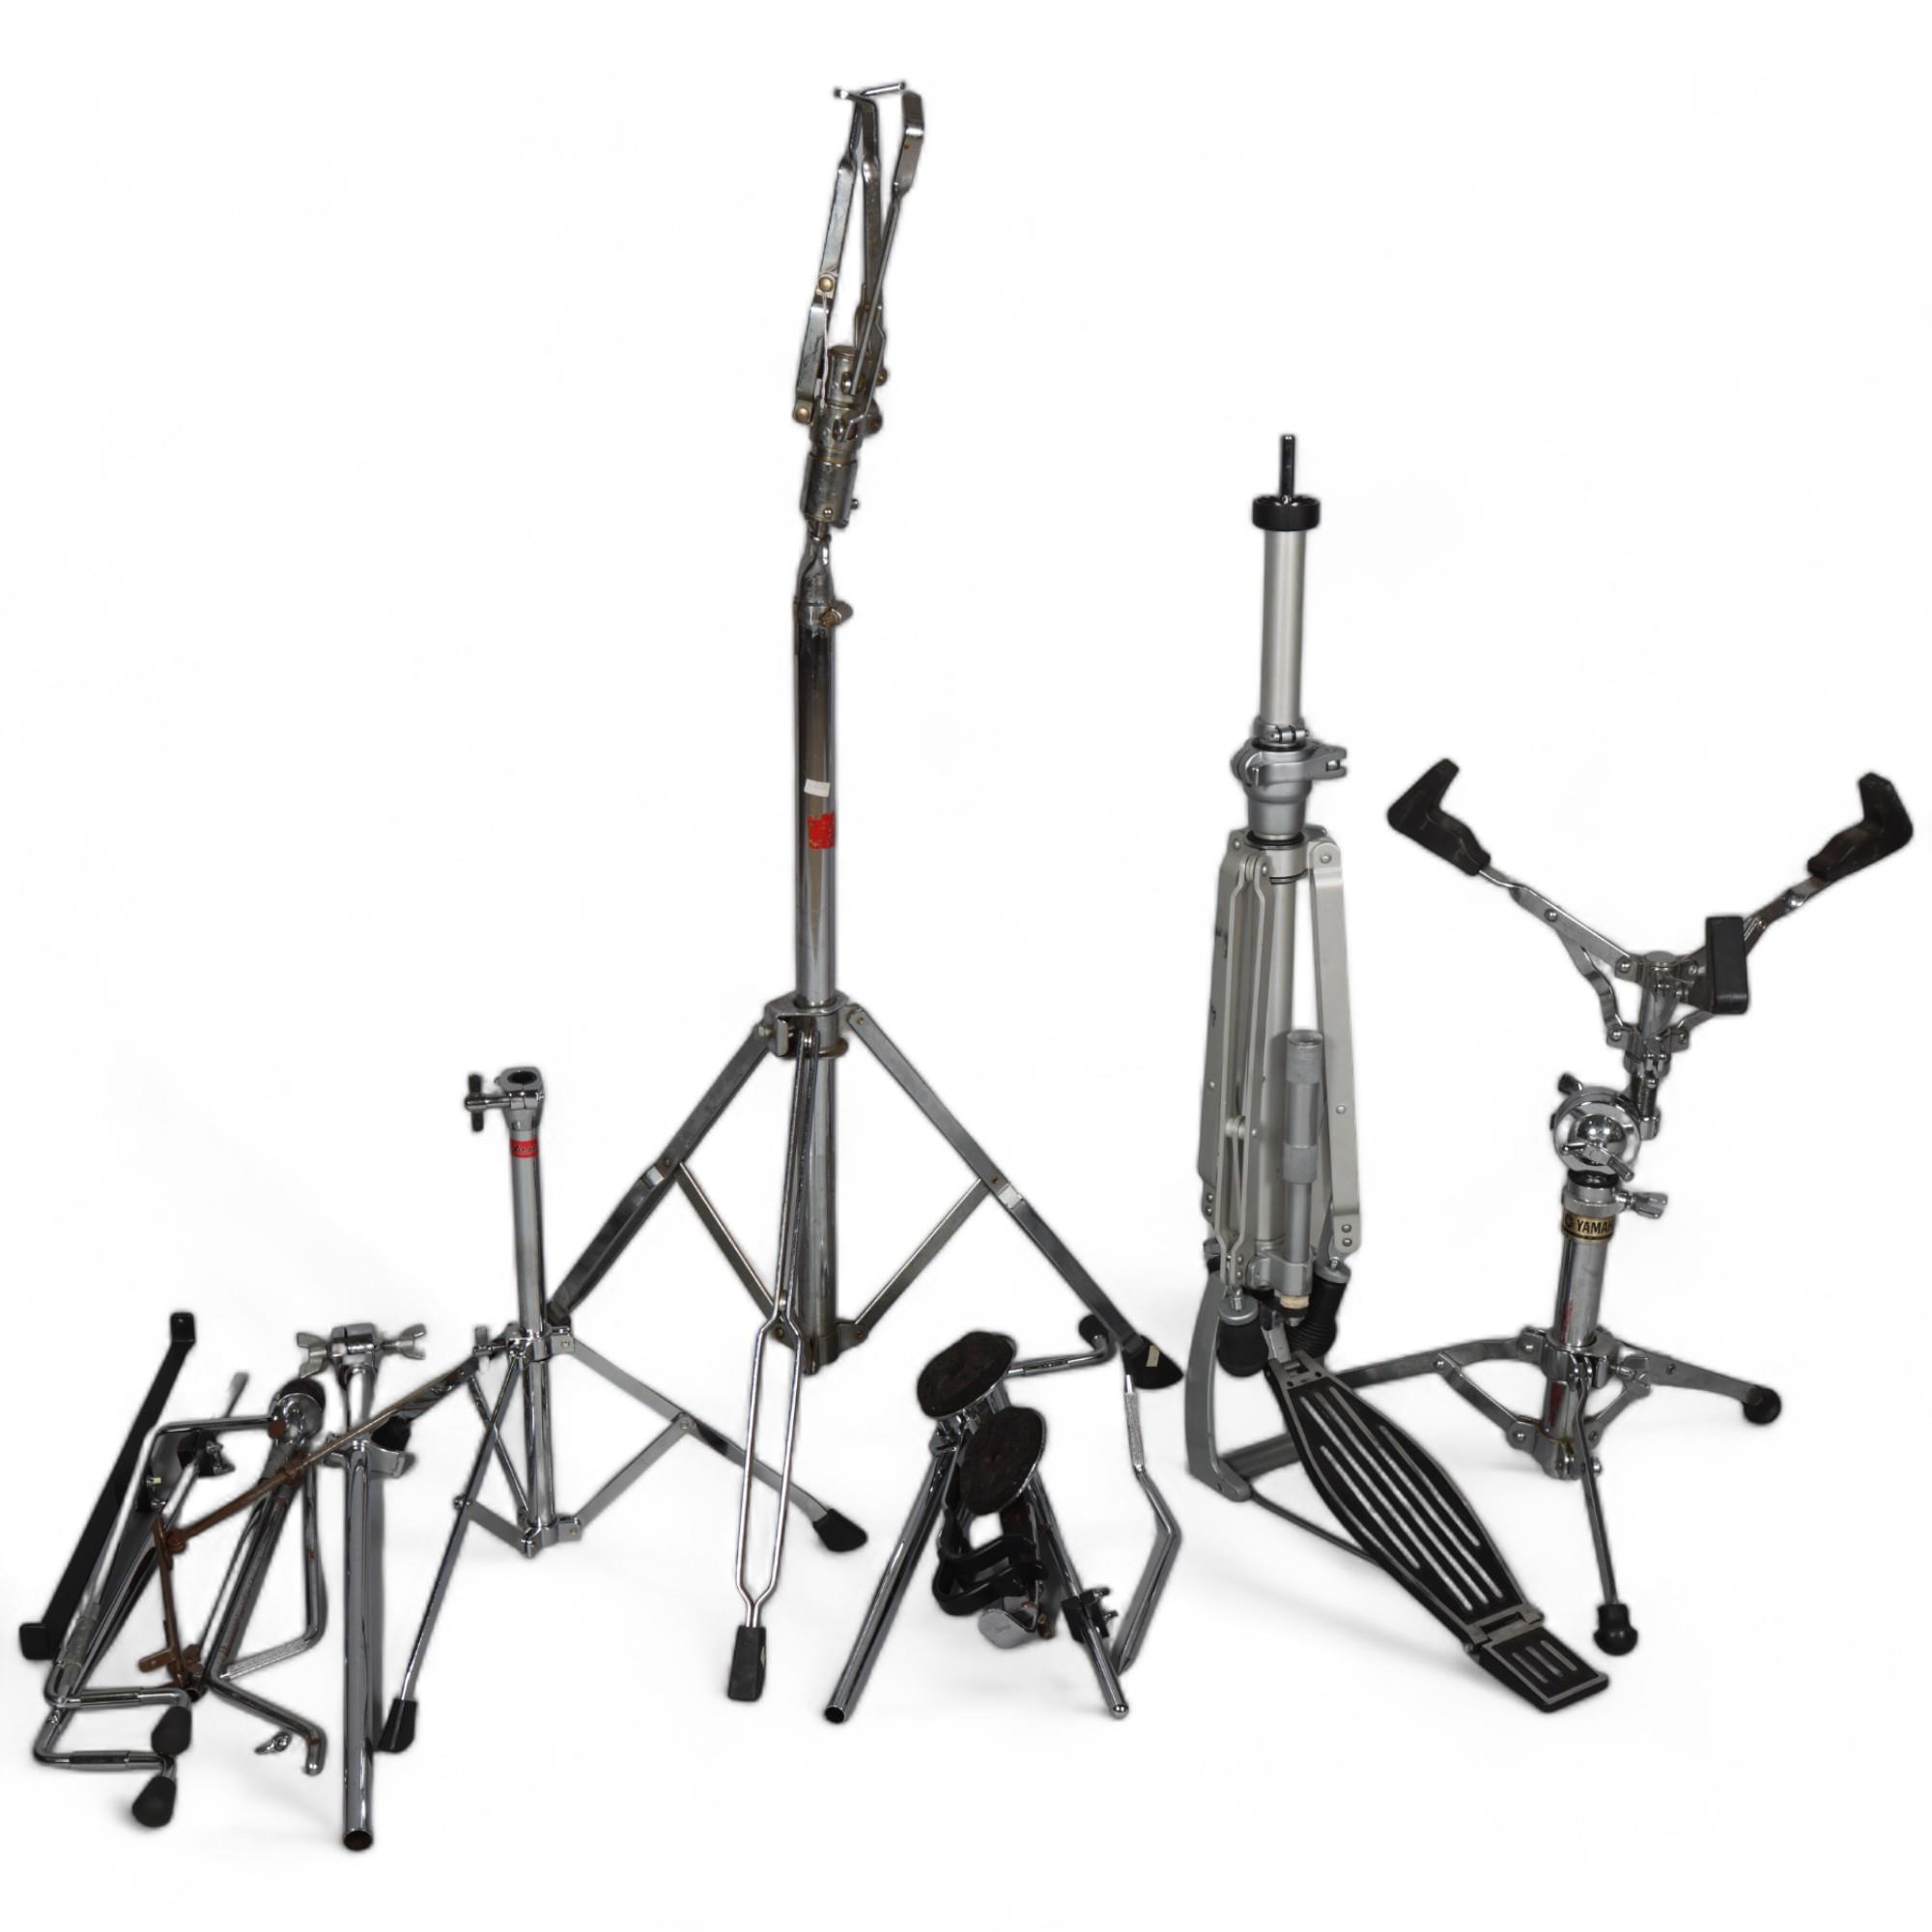 JIMI HENDRIX / MITCH MITCHELL INTEREST - A quantity of CYMBAL STANDS, CLAMPS & DRUM HARDWARE